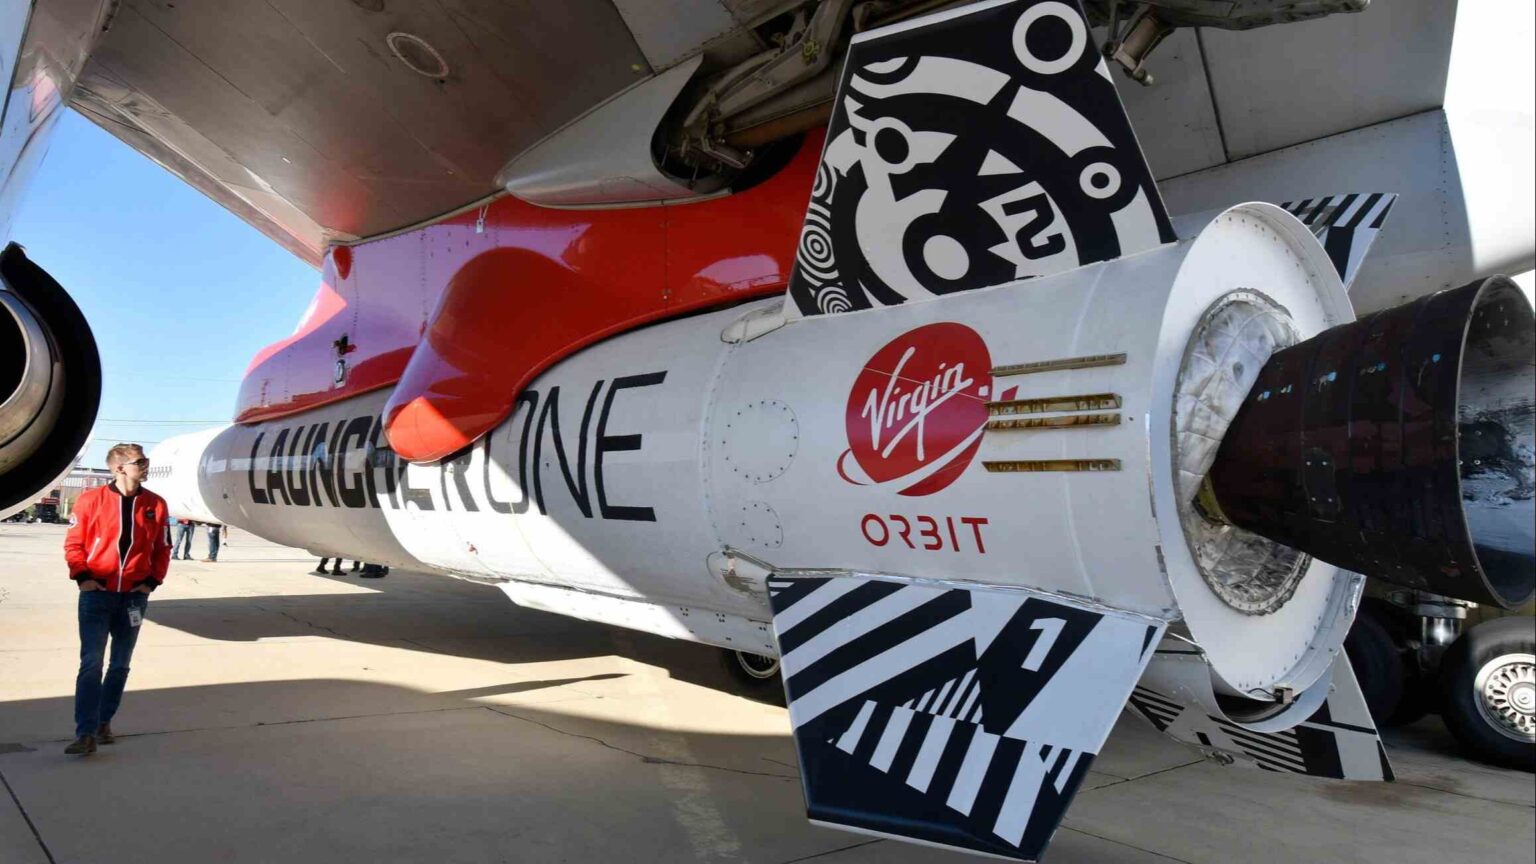 Virgin Orbit lays off 85% of staff after failing to secure funding 